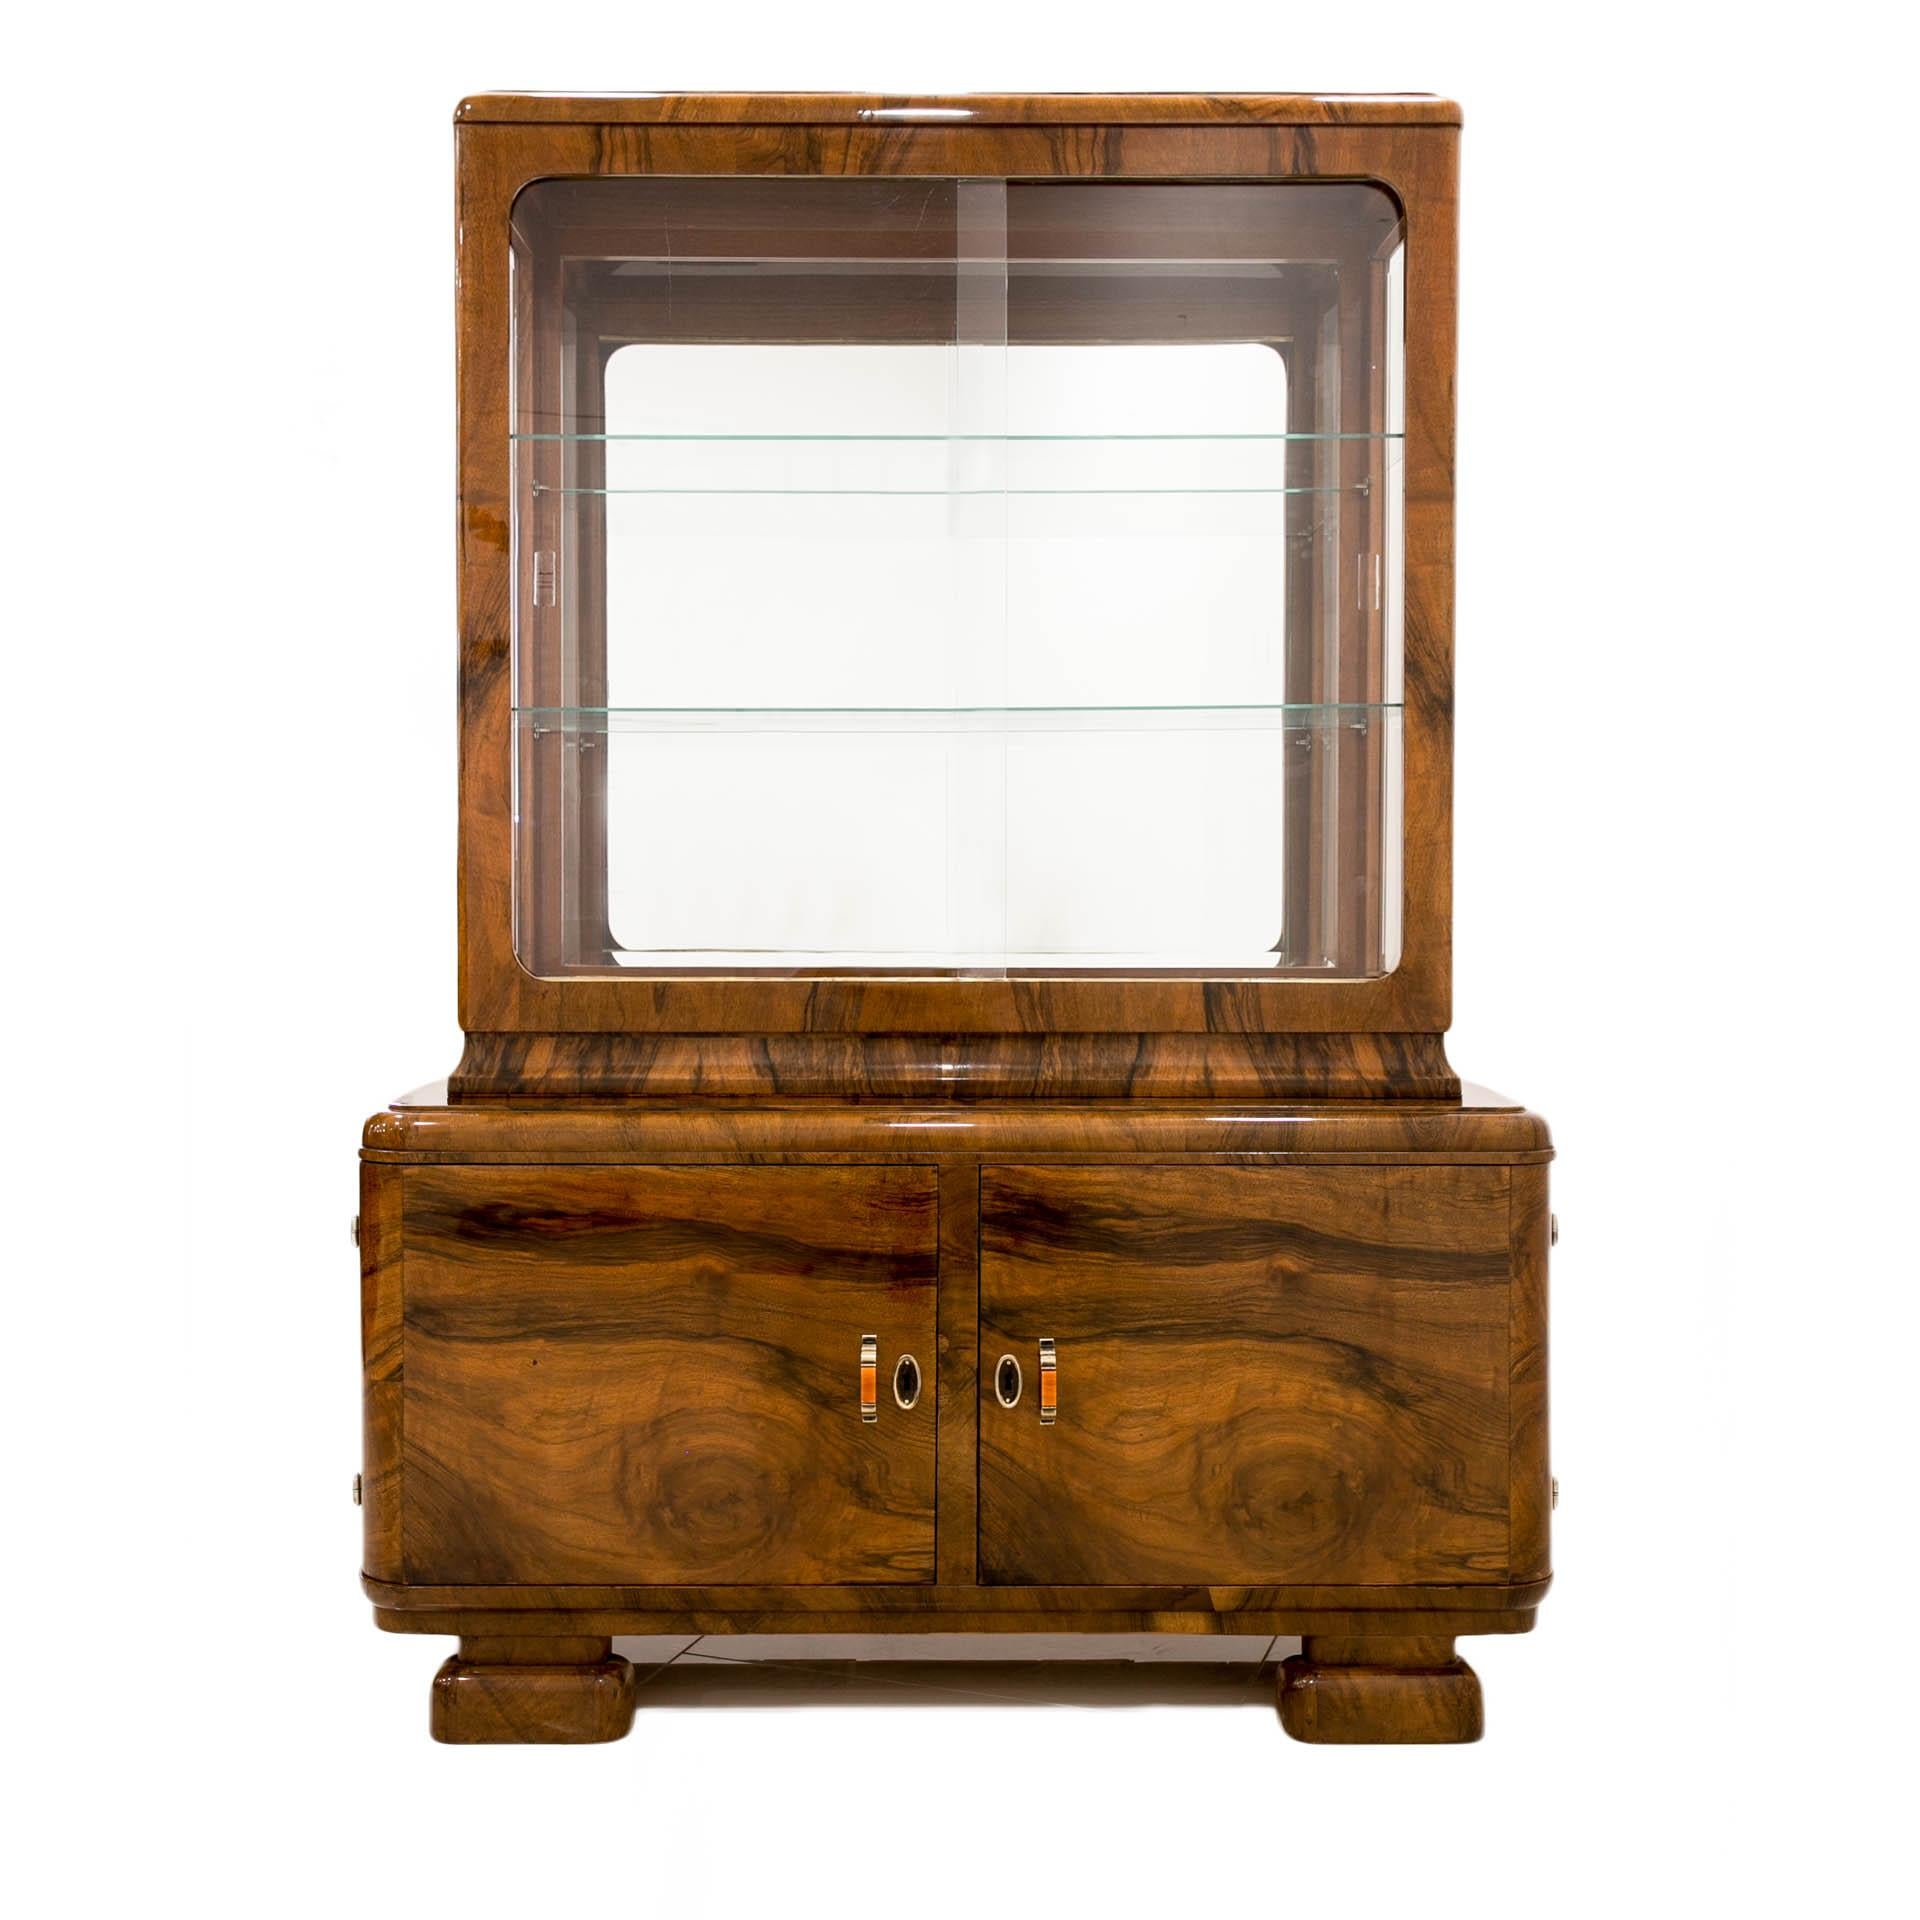 This beautiful Art Deco display cabinet comes from Poland and was made circa first half of the 20th century. The structure is made of coniferous wood, veneered with beautiful walnut veneer. The piece is after professional renovation and is in